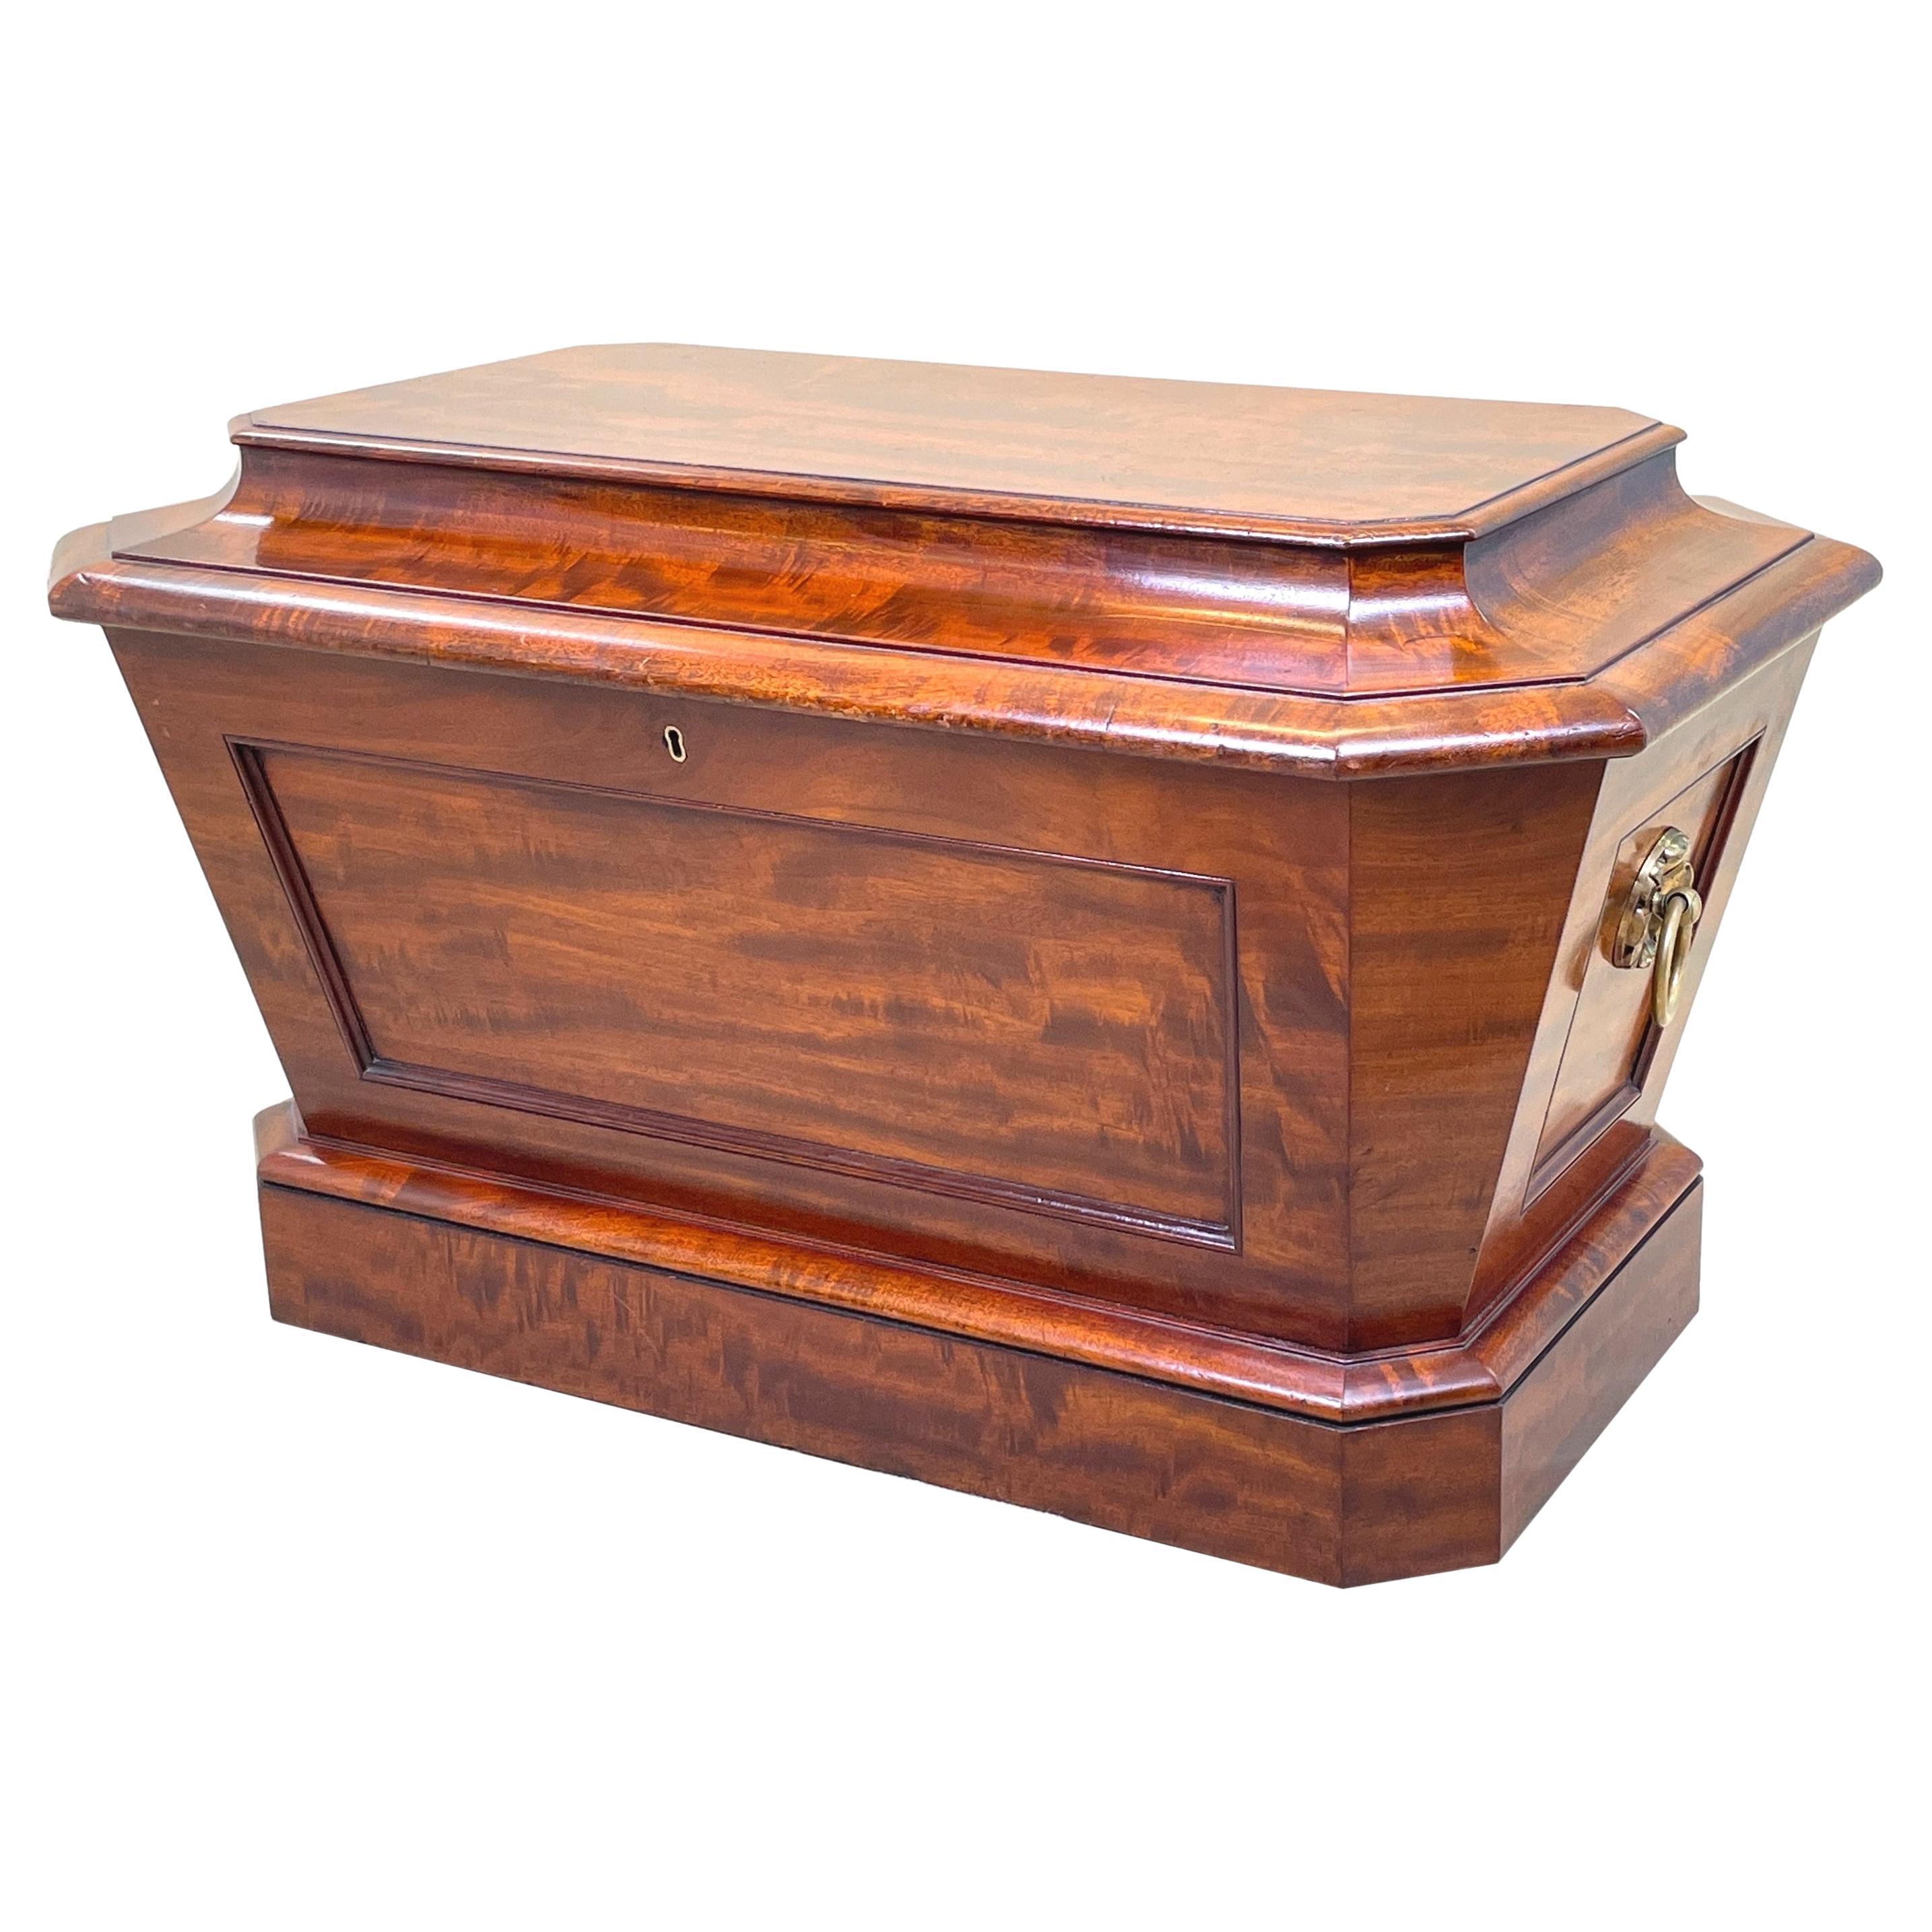 English Regency Mahogany Sarcophagus Shaped Wine Cooler For Sale